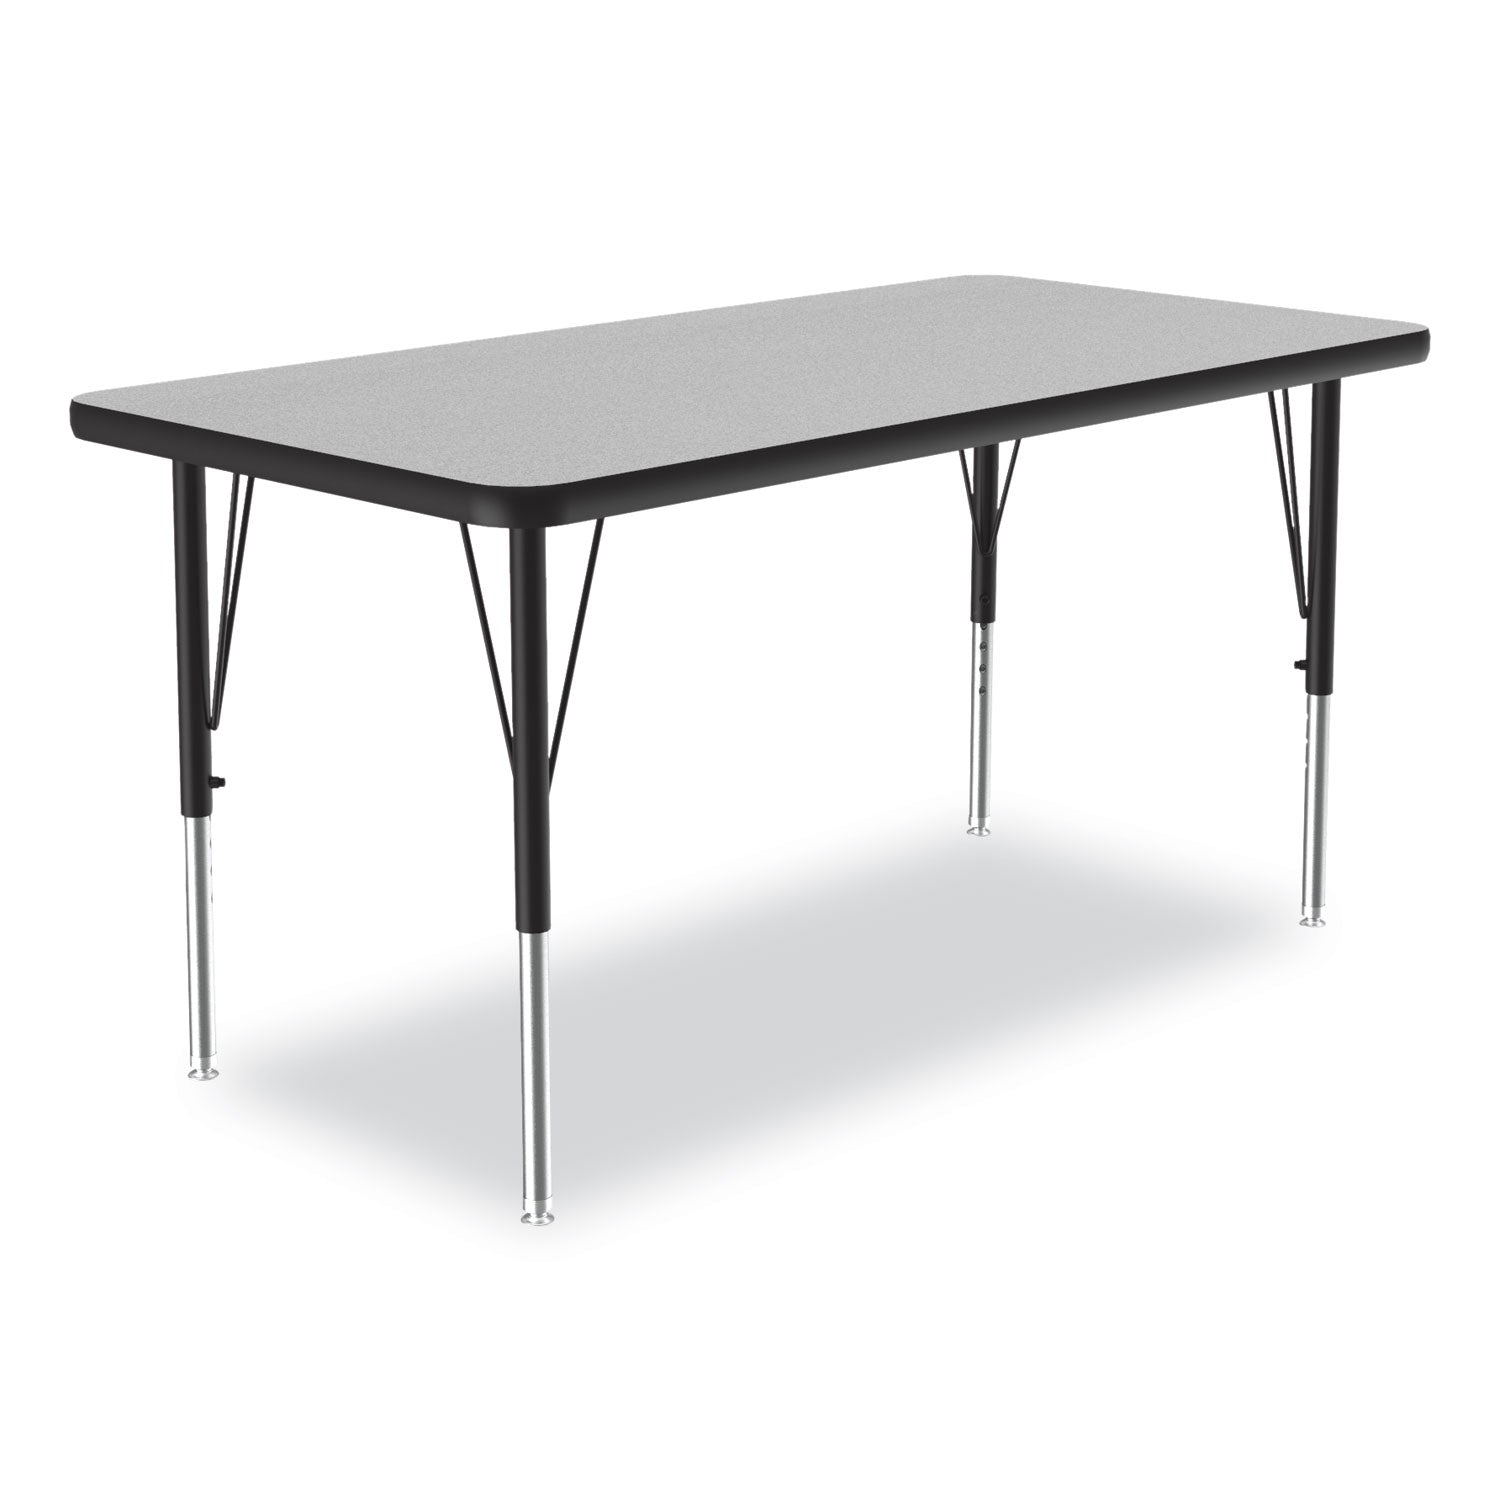 adjustable-activity-table-rectangular-48-x-24-x-19-to-29-granite-top-black-legs-4-pallet-ships-in-4-6-business-days_crl2448tf1595k4 - 2